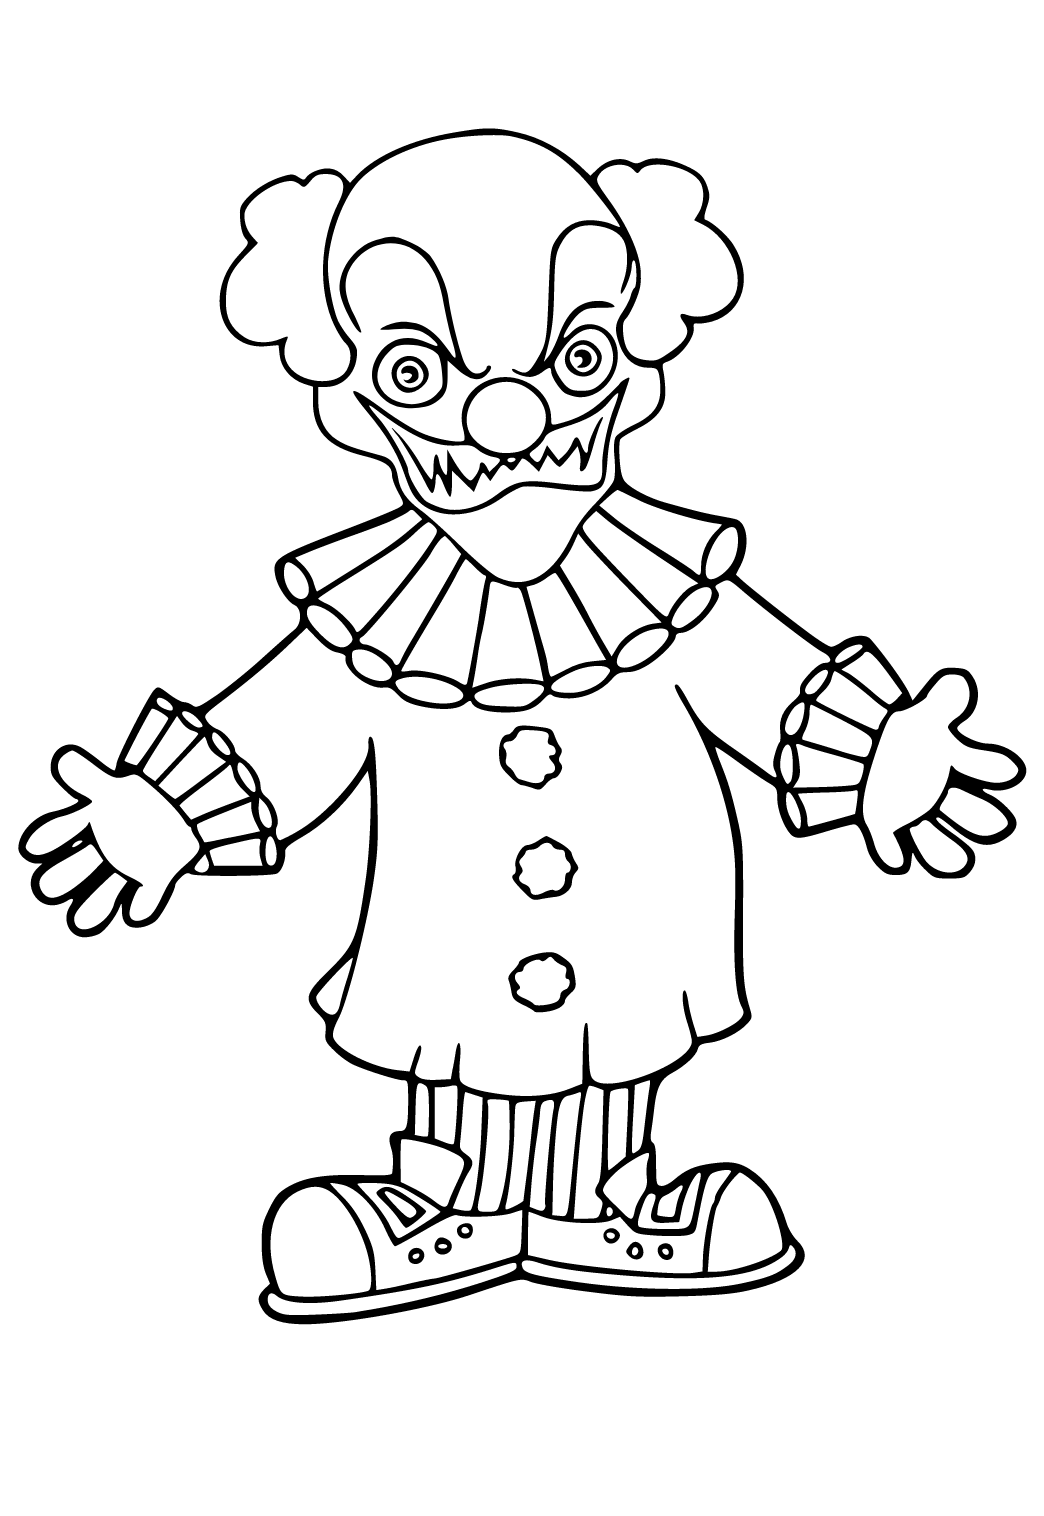 Free printable clown scary coloring page for adults and kids